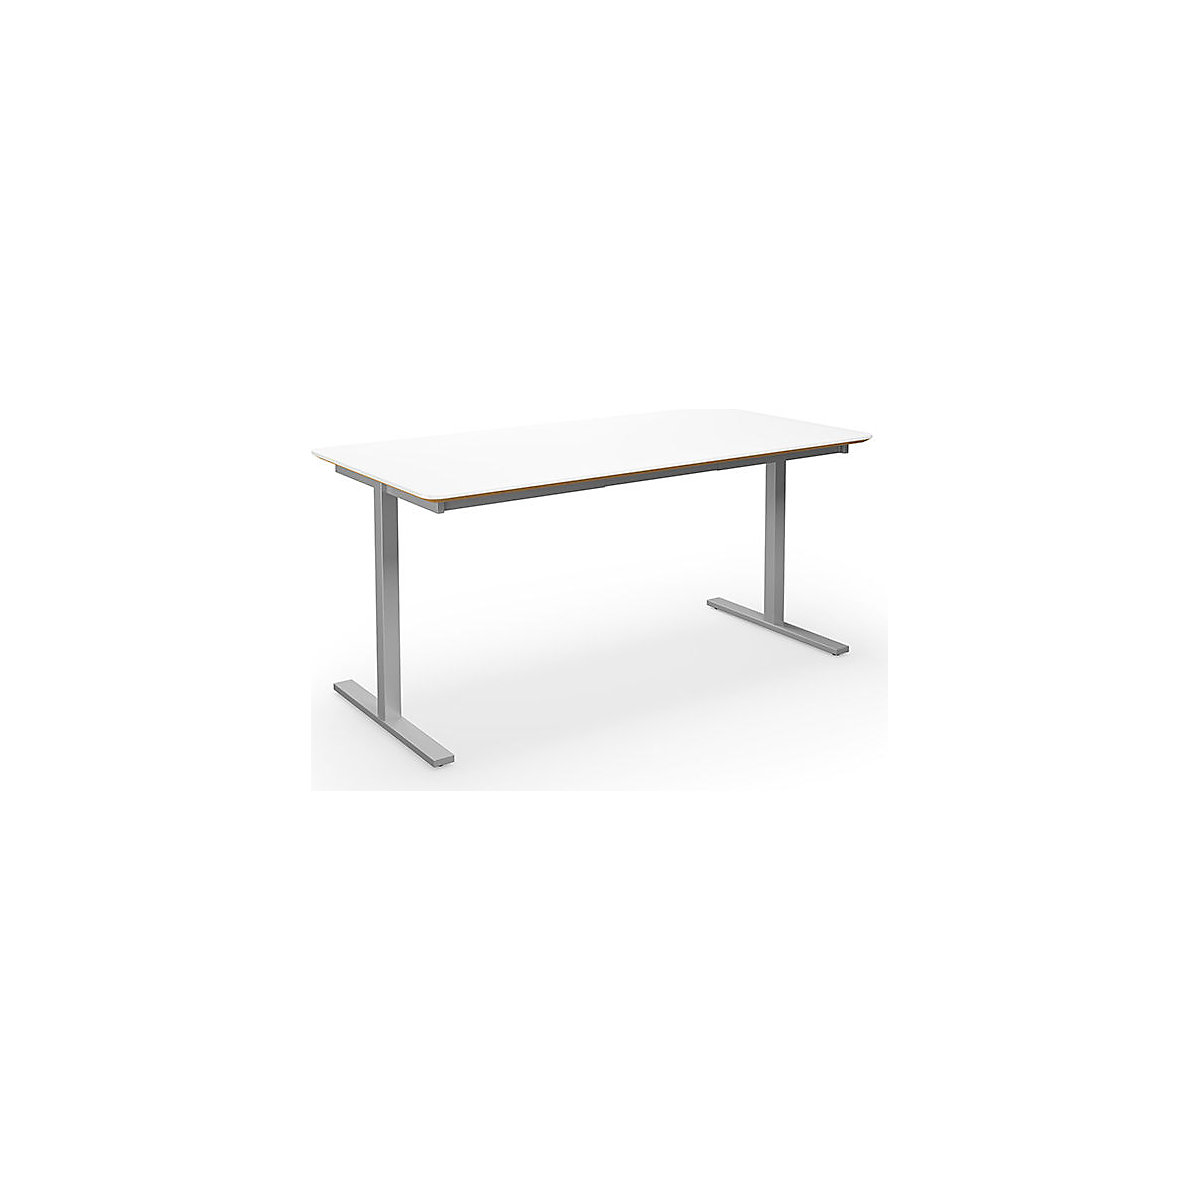 DUO-T Trend multi-purpose desk, straight tabletop, rounded corners, WxD 1600 x 800 mm, white, silver-4